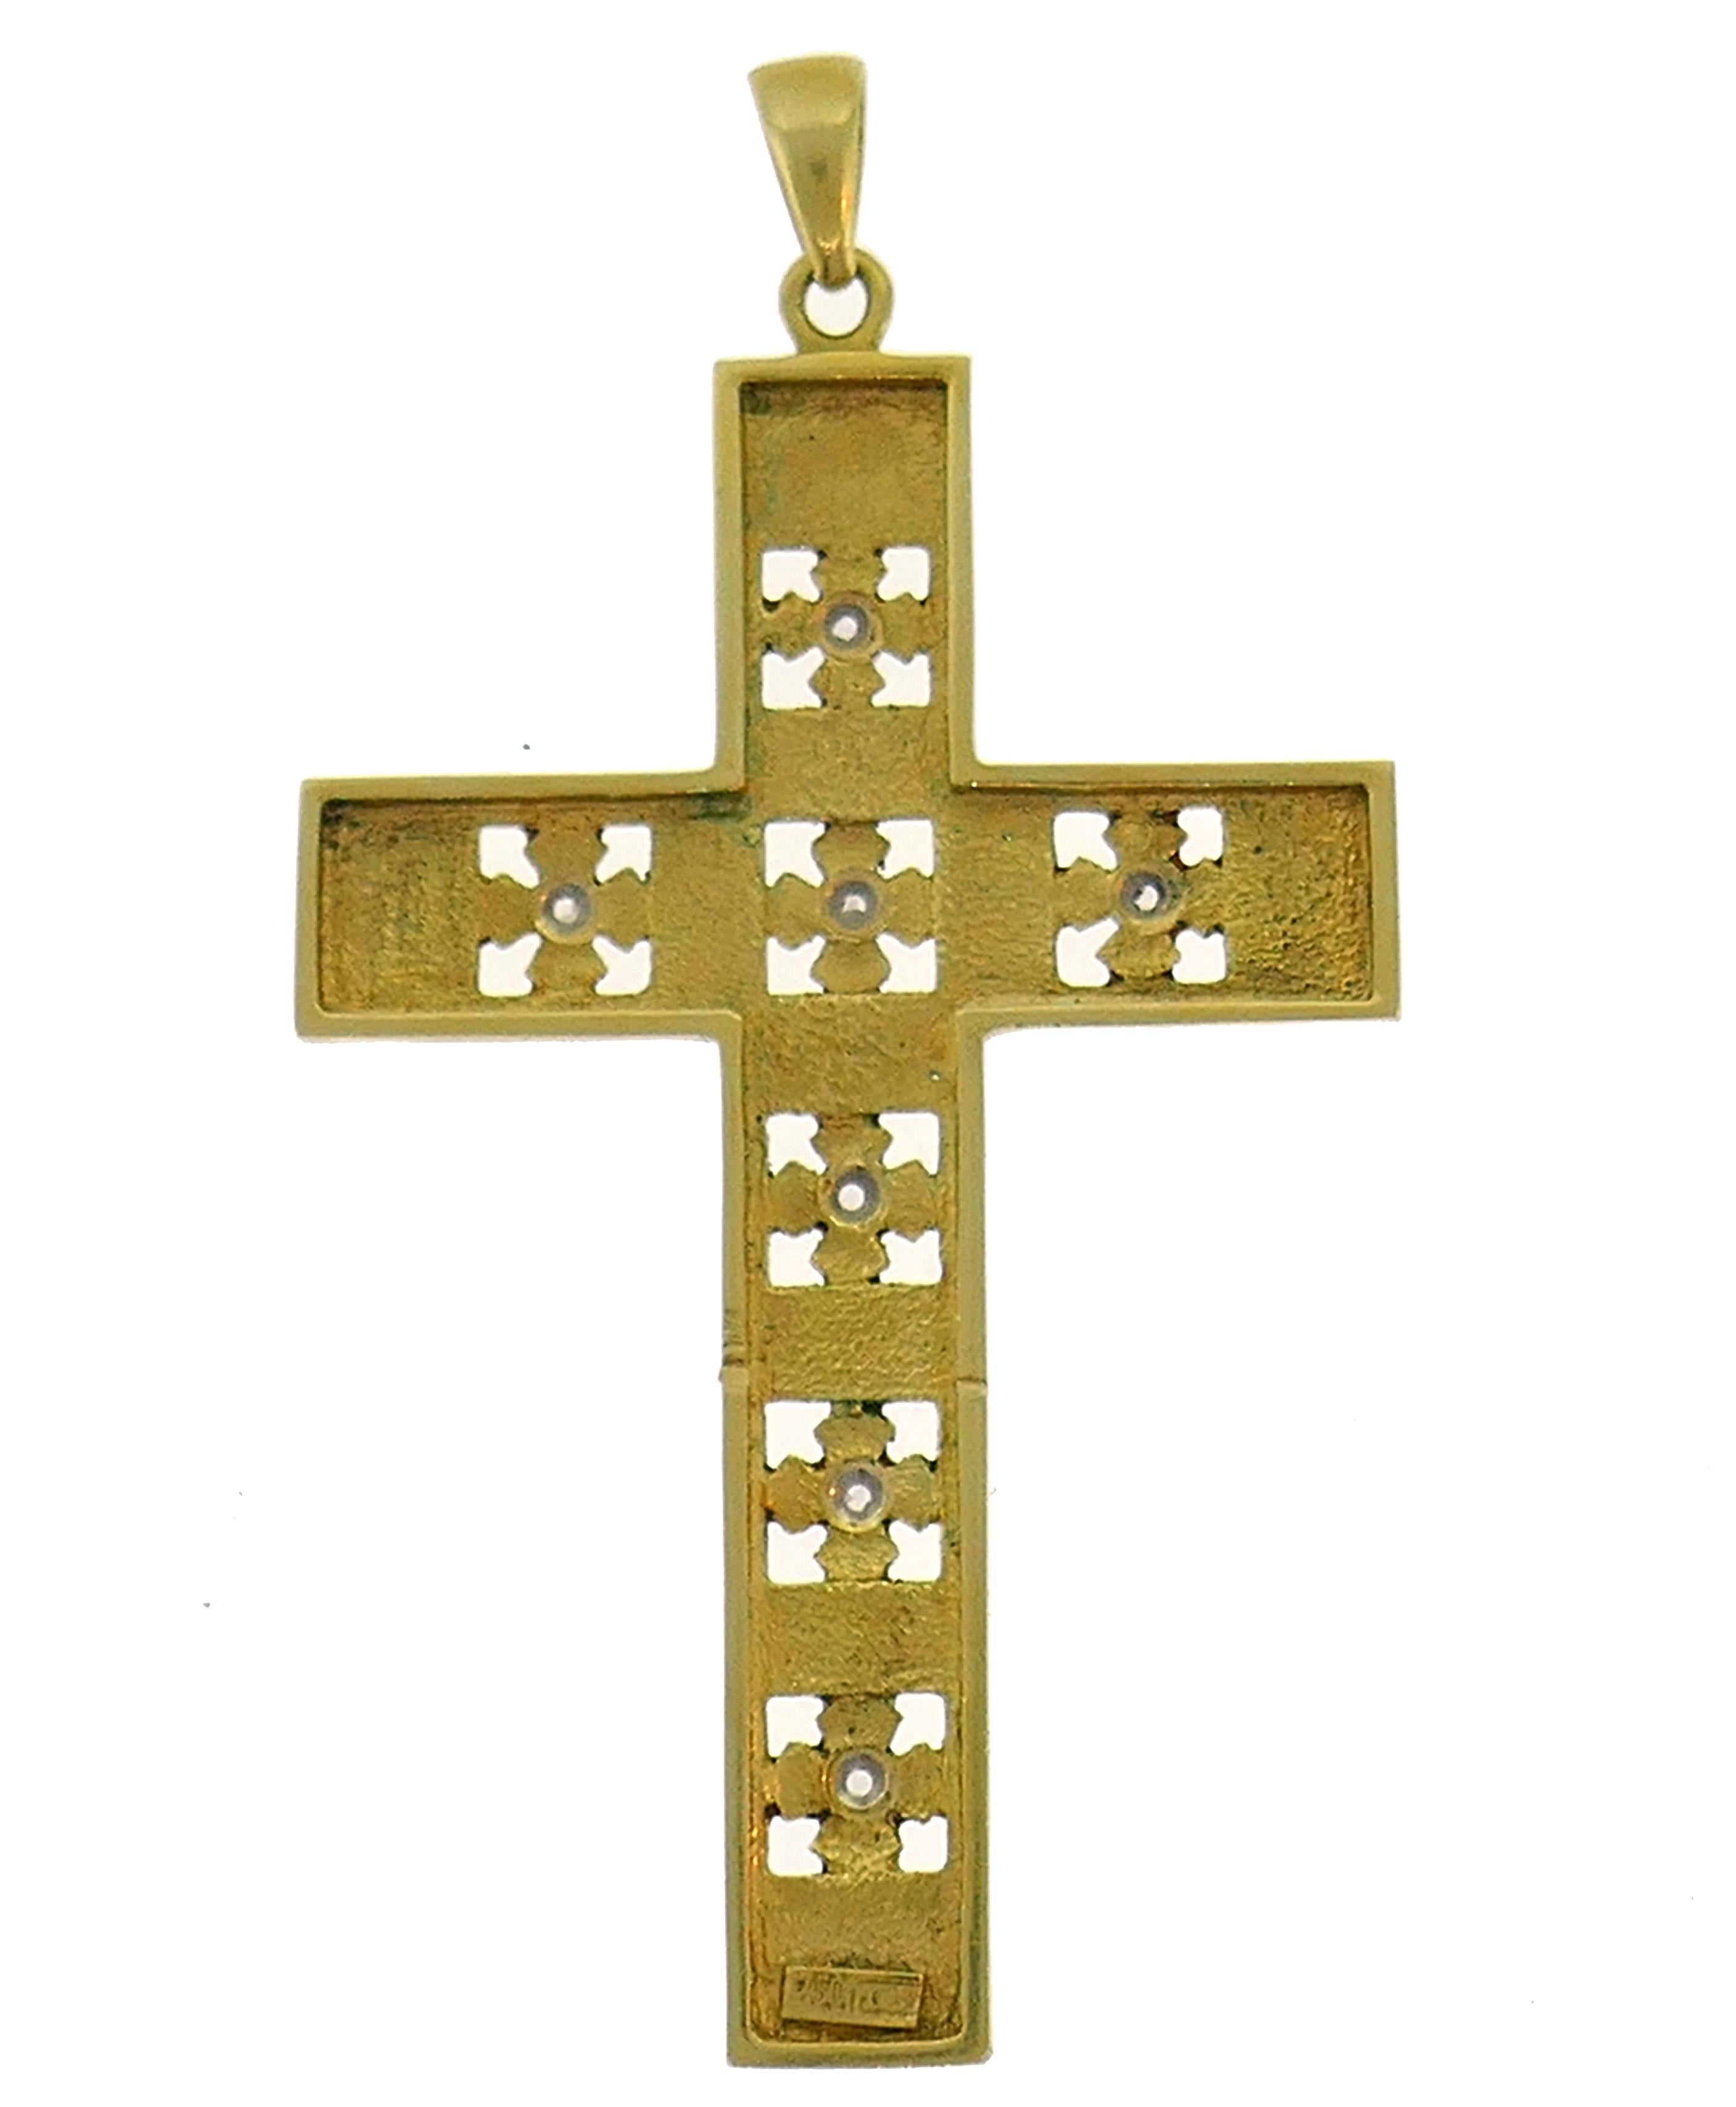 Beautiful Victorian cross pendant.
Made of 18 karat yellow gold, enamel and set with rose cut diamonds, 
Measurements: 2-3/8 x 1-1/2 inches (6 x 3.8 cm) without the bail. 
Weight is 11.8 grams.
Stamped with hallmark for 18 karat gold.